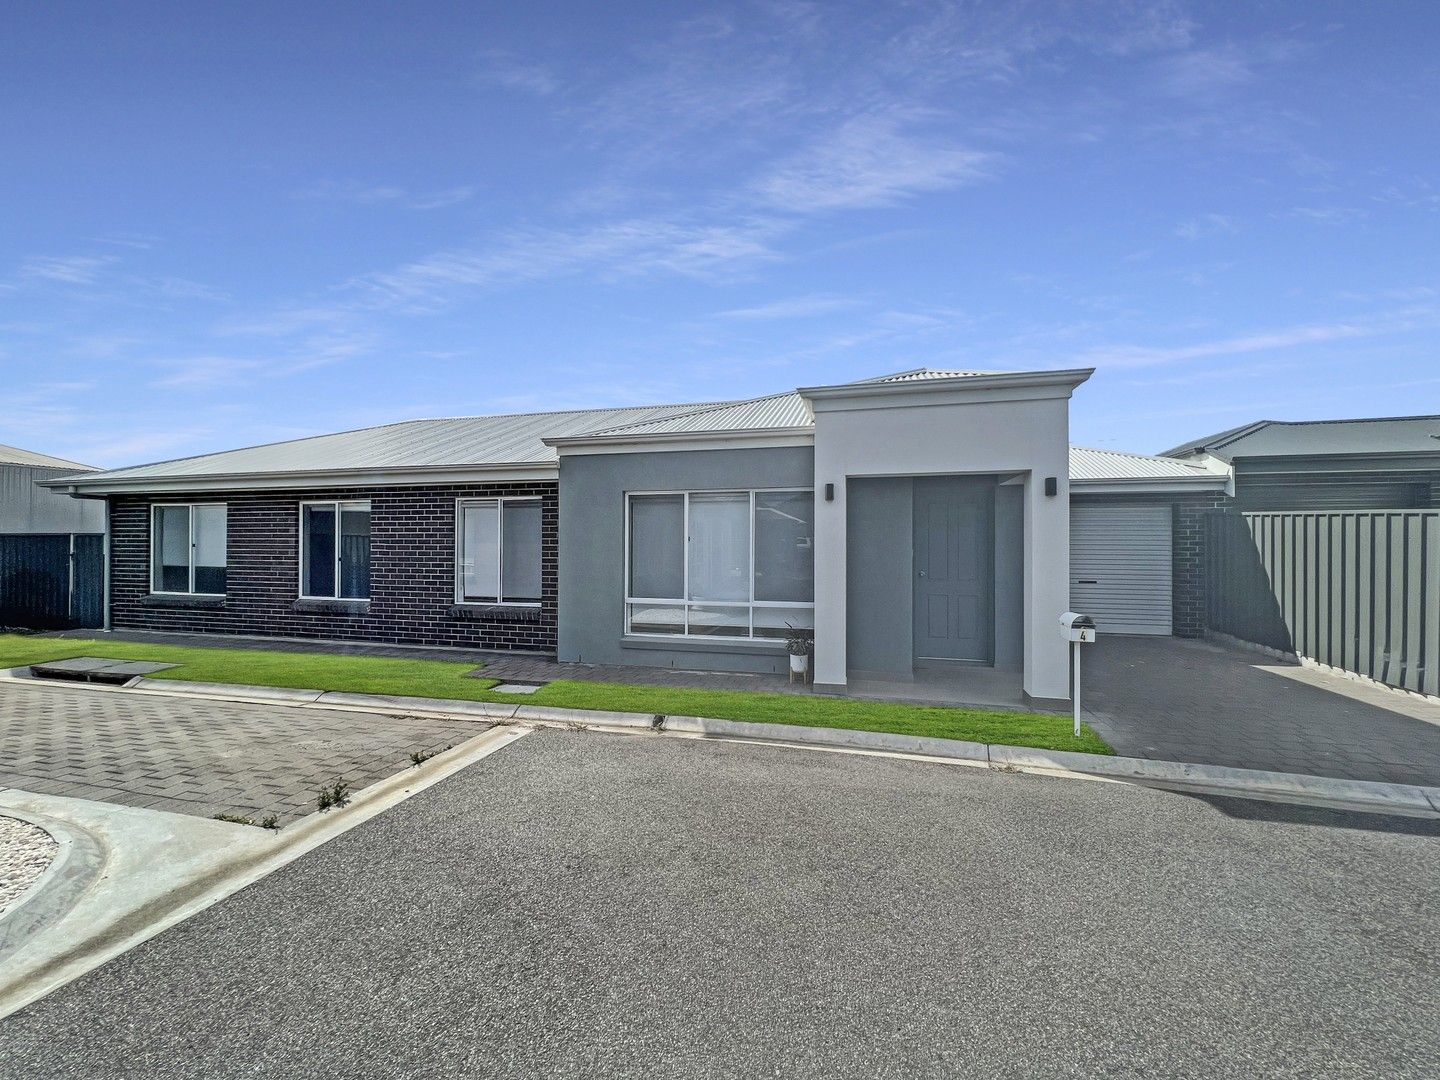 3 bedrooms Block of Units in 4/15 Dublin Street PORT LINCOLN SA, 5606